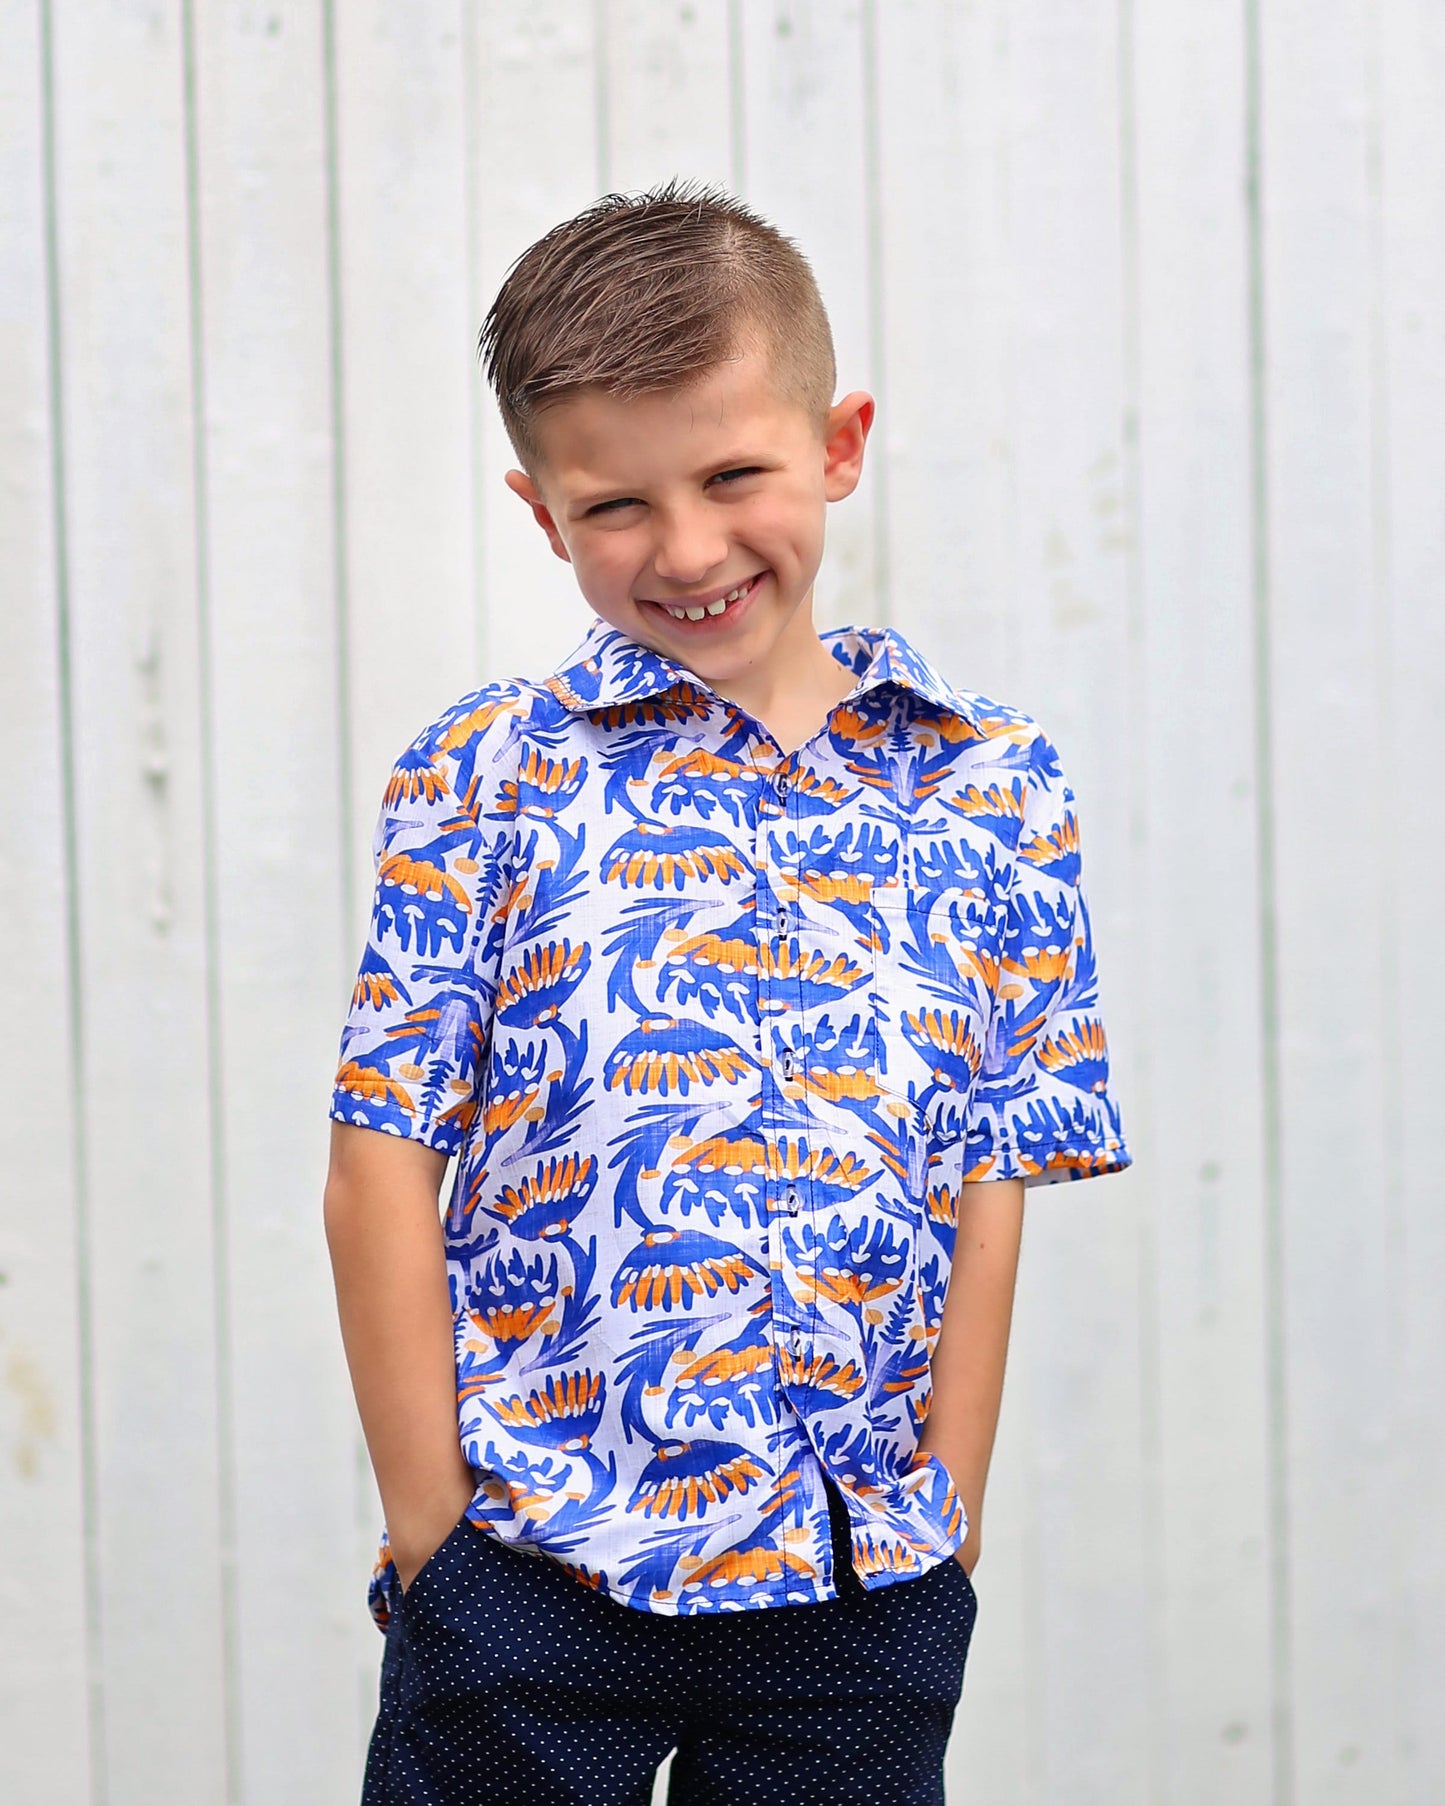 Boys Blue, Yellow and White Patterned Button up Shirt - Boys Button Shirt - Boys Dress Shirt